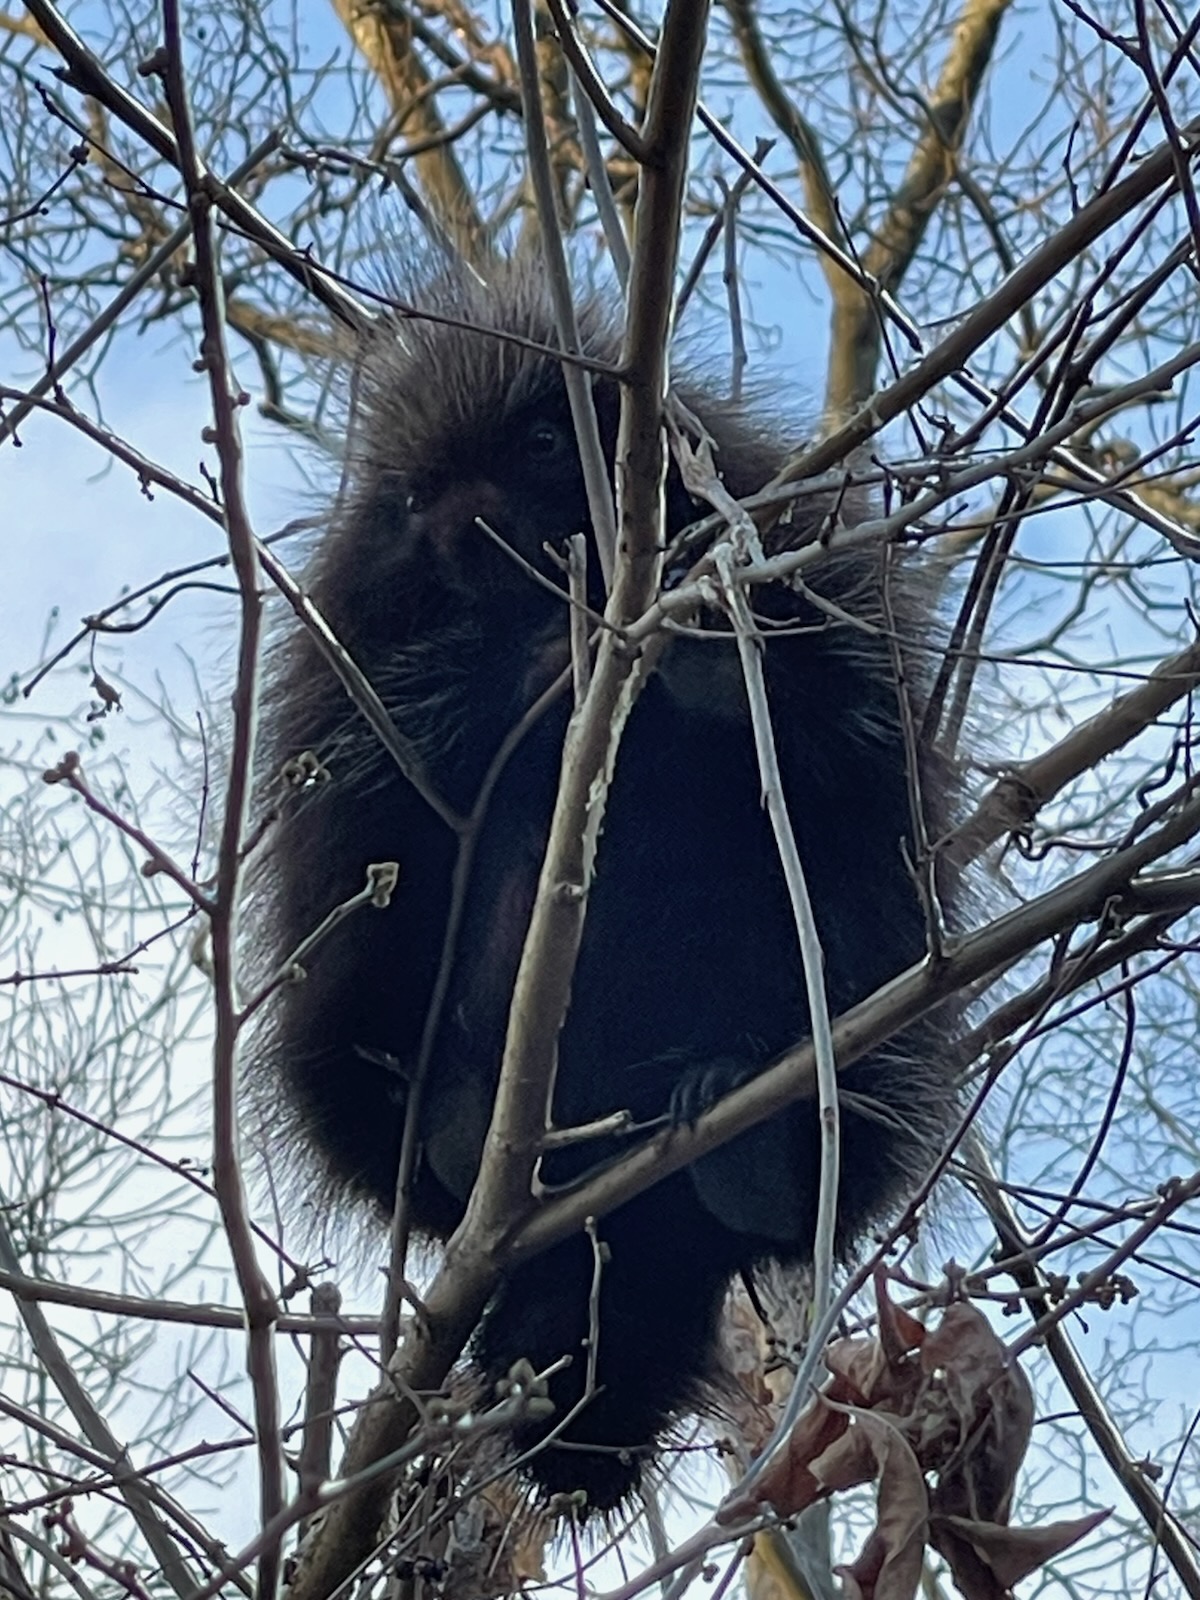 porcupine in a tree looking down at camera